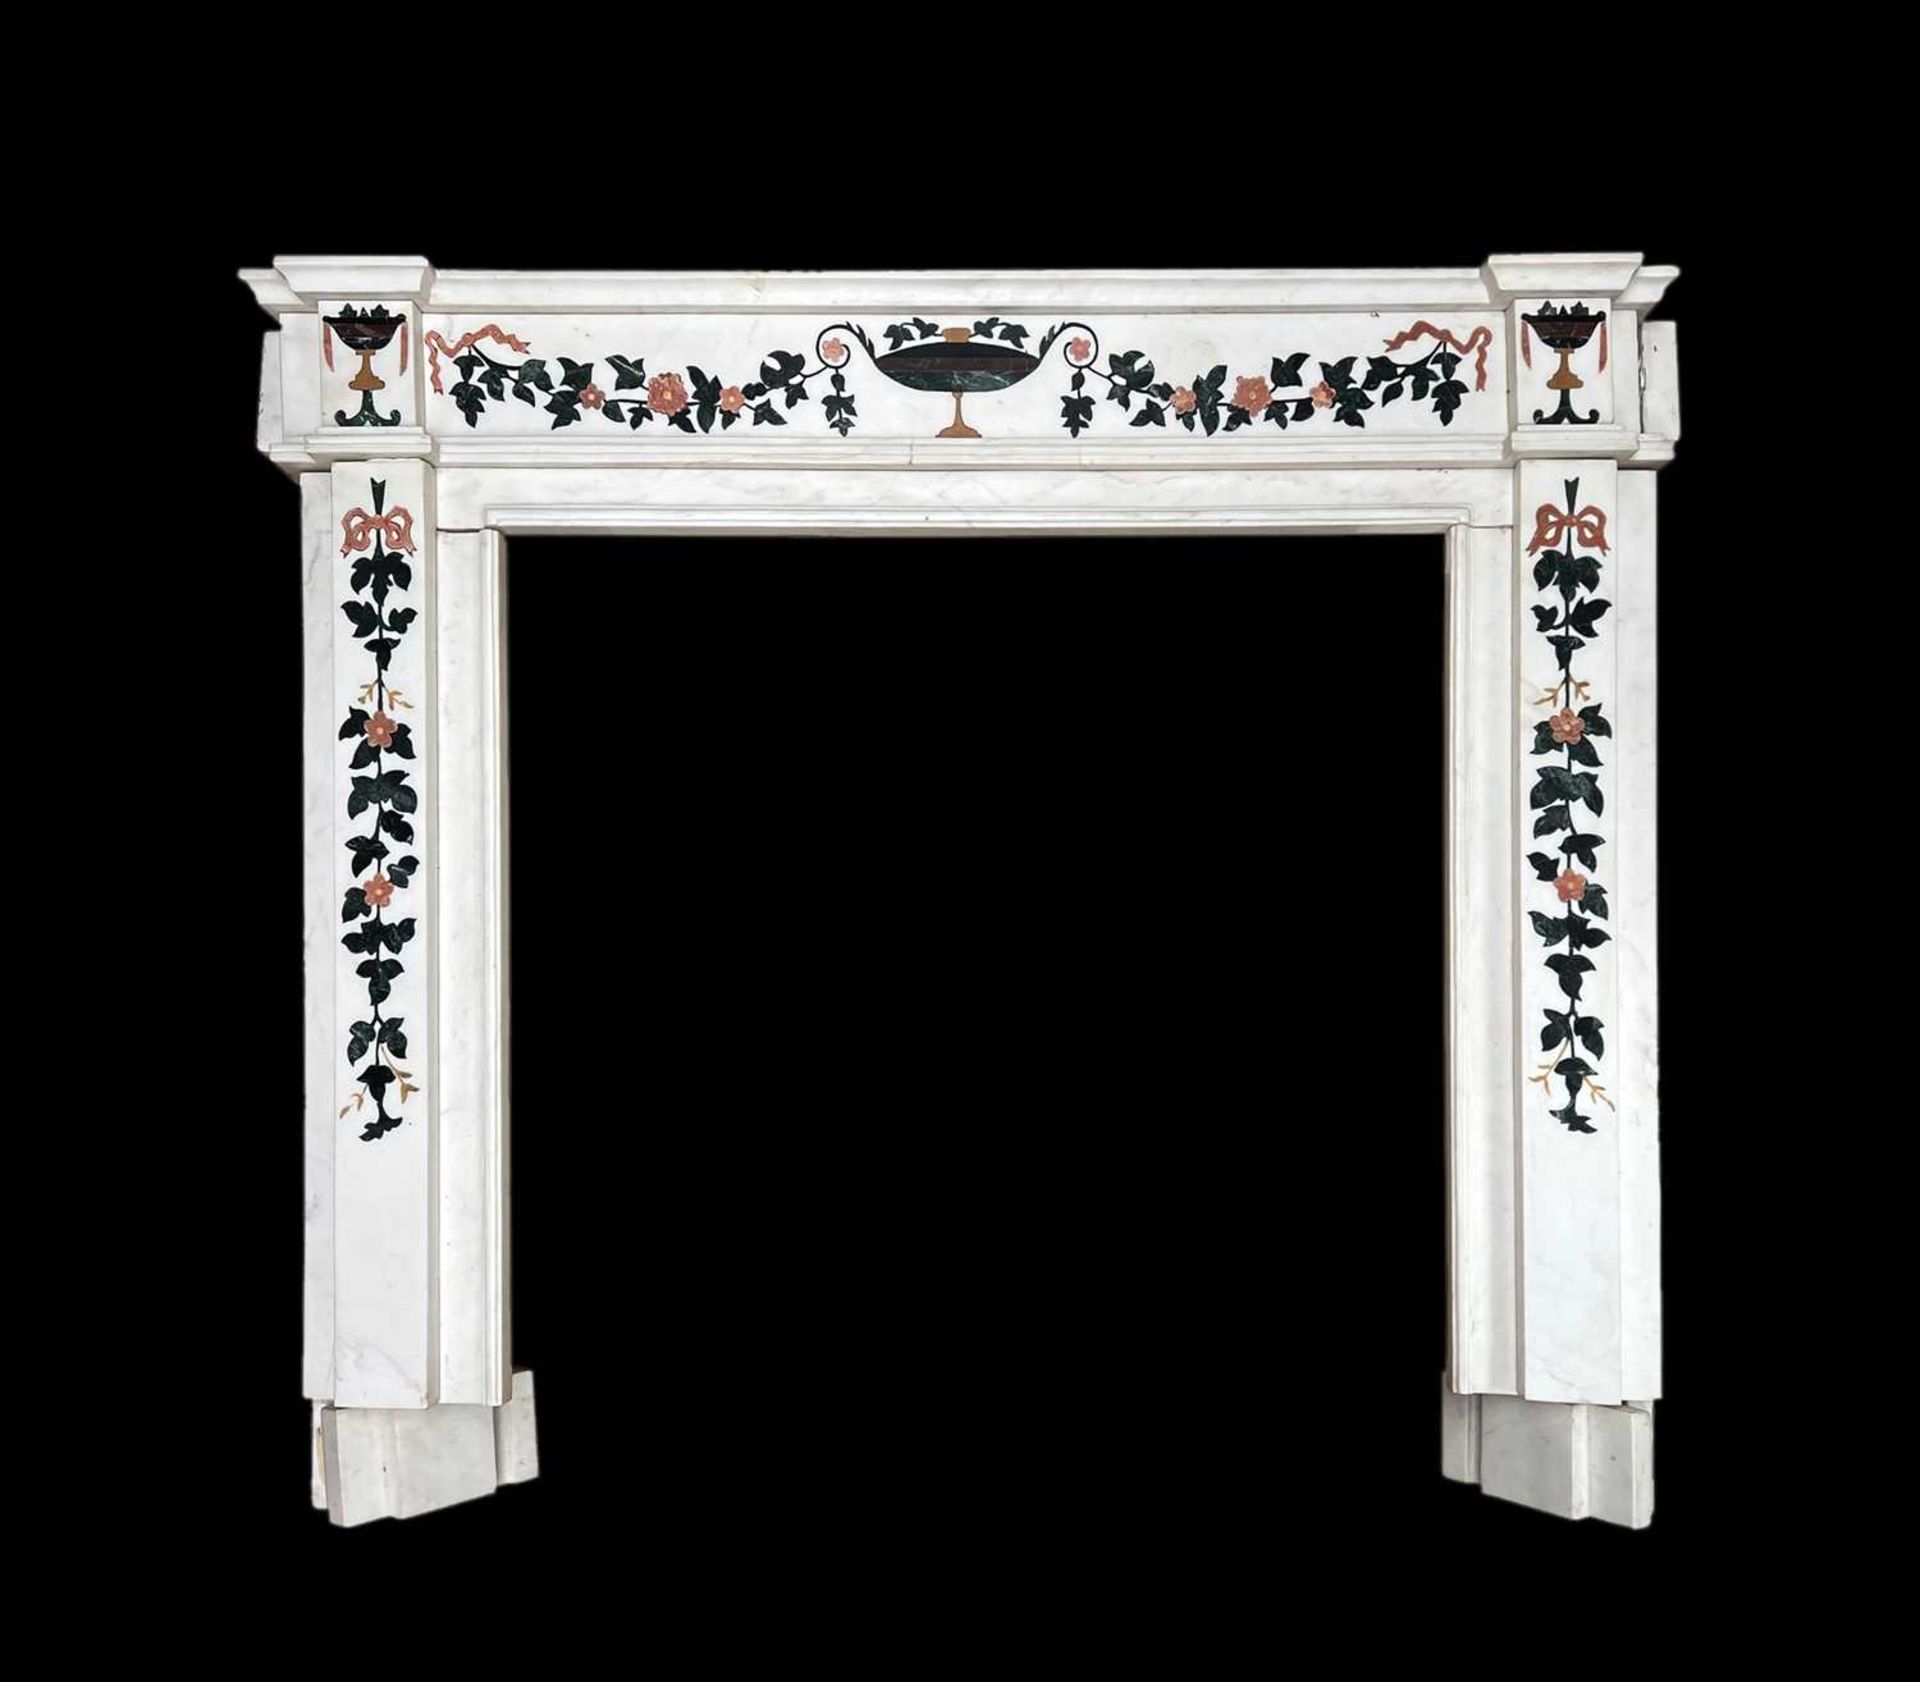 A GEORGE III STYLE MARBLE CHIMNEYPIECE IN THE MANNER OF PIETRO BOSSI